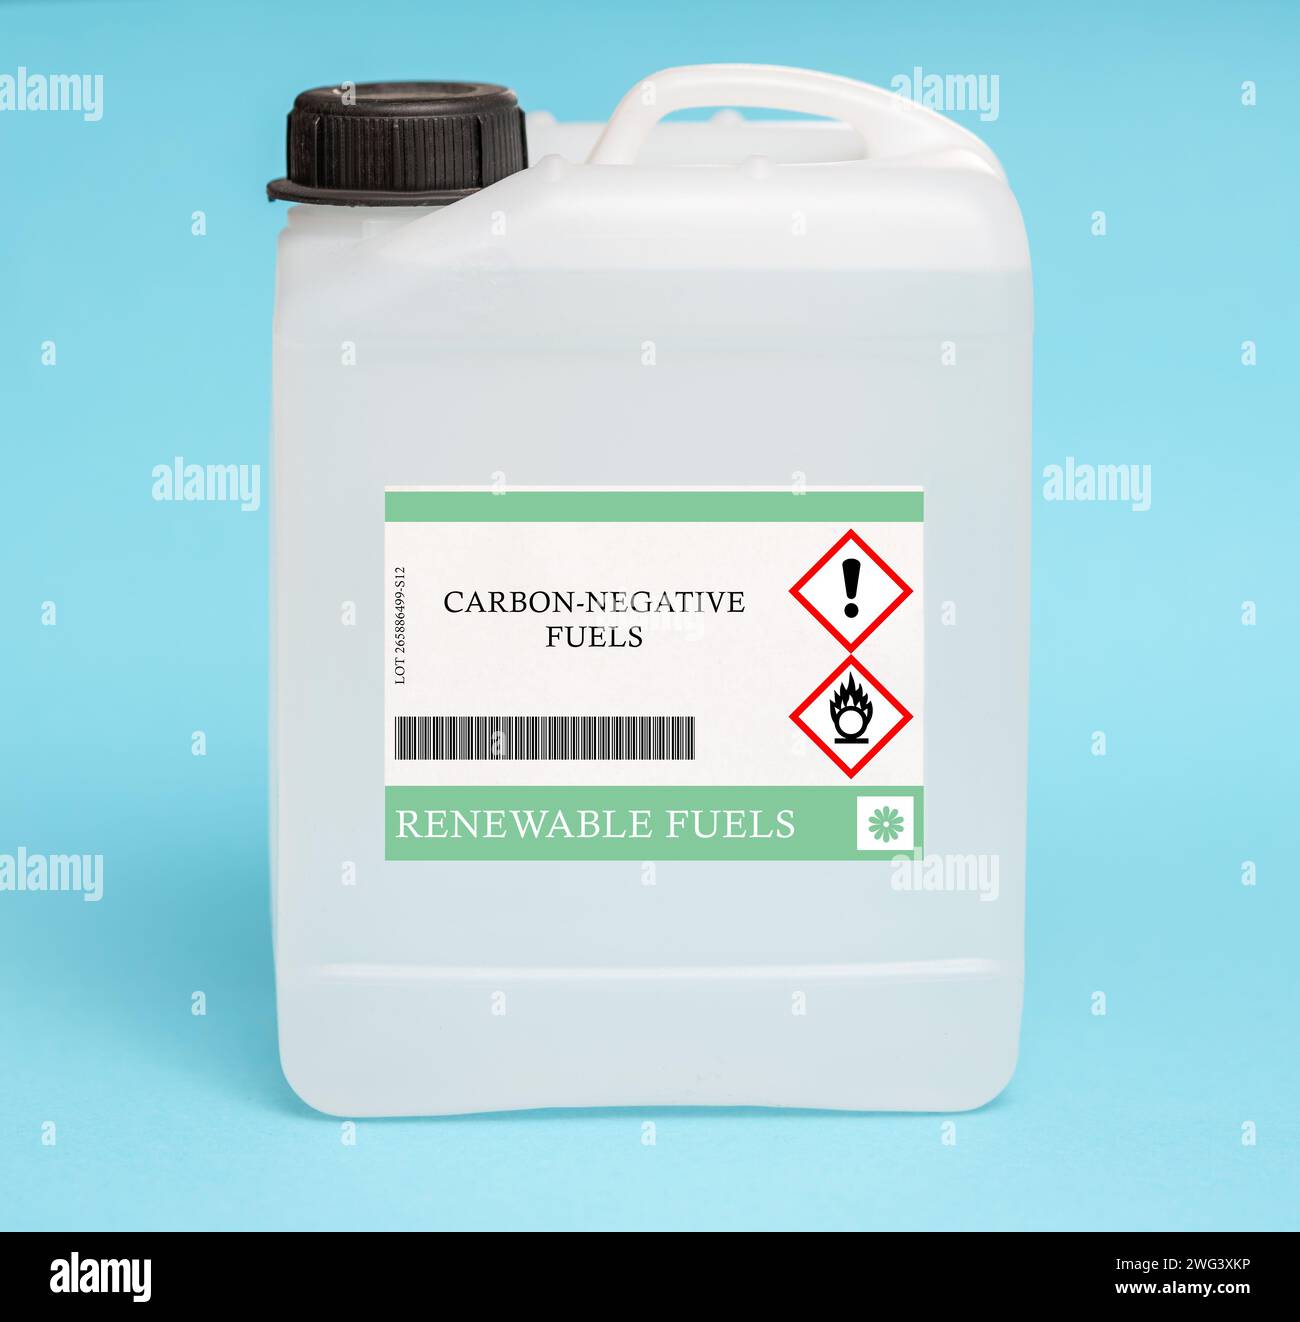 Canister of carbon-negative fuels Stock Photo